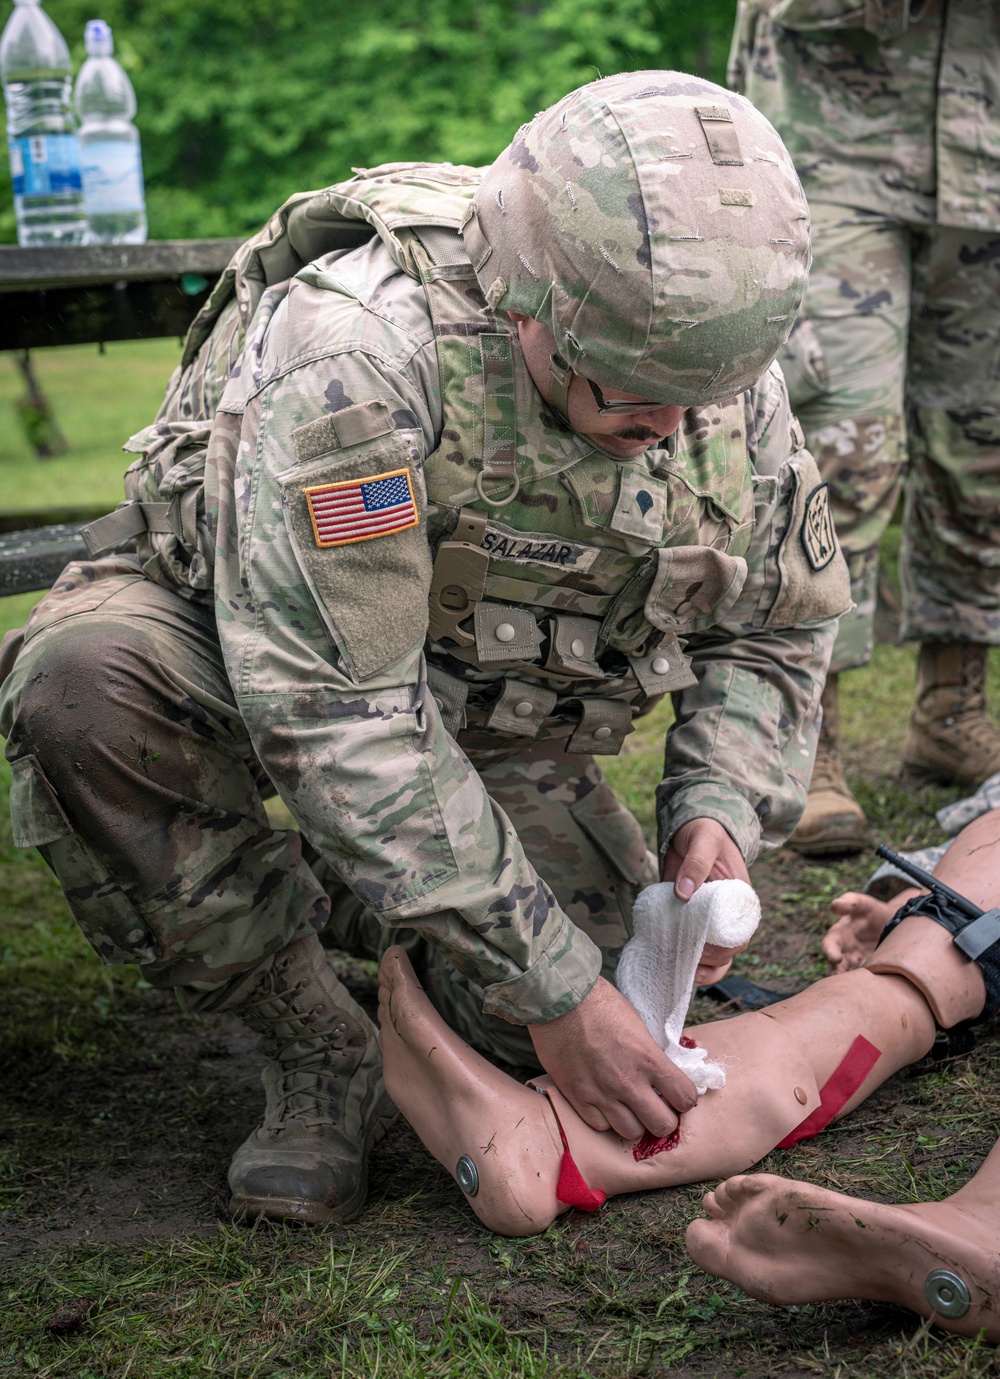 10th AAMDC conducts Combat Life Saving Course